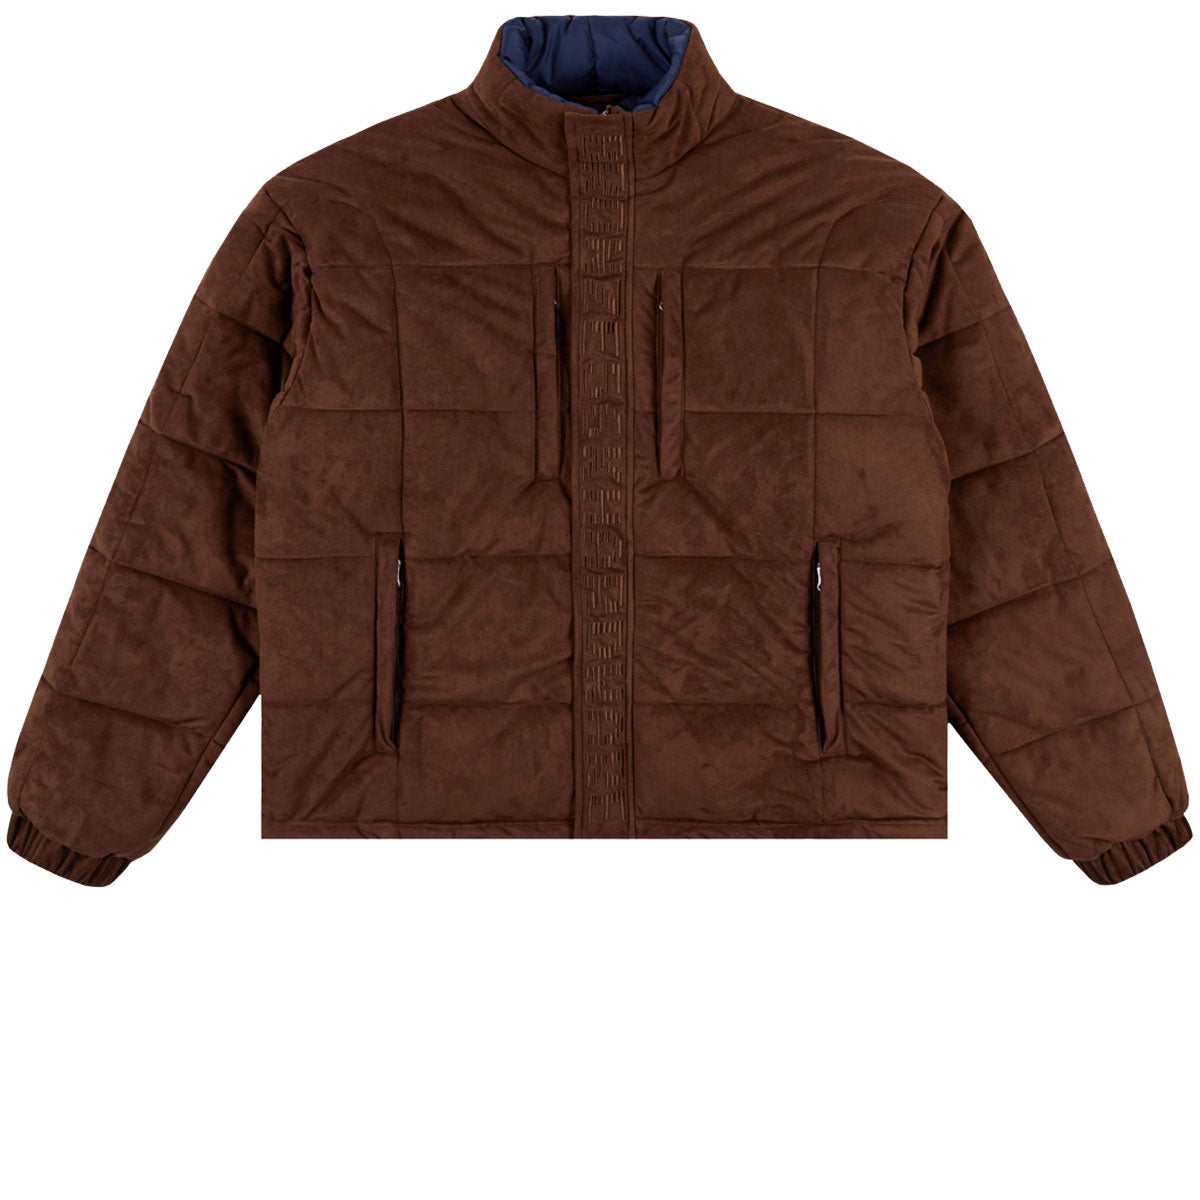 Bronze 56k Faux Suede Puffer Jacket - Brown image 1